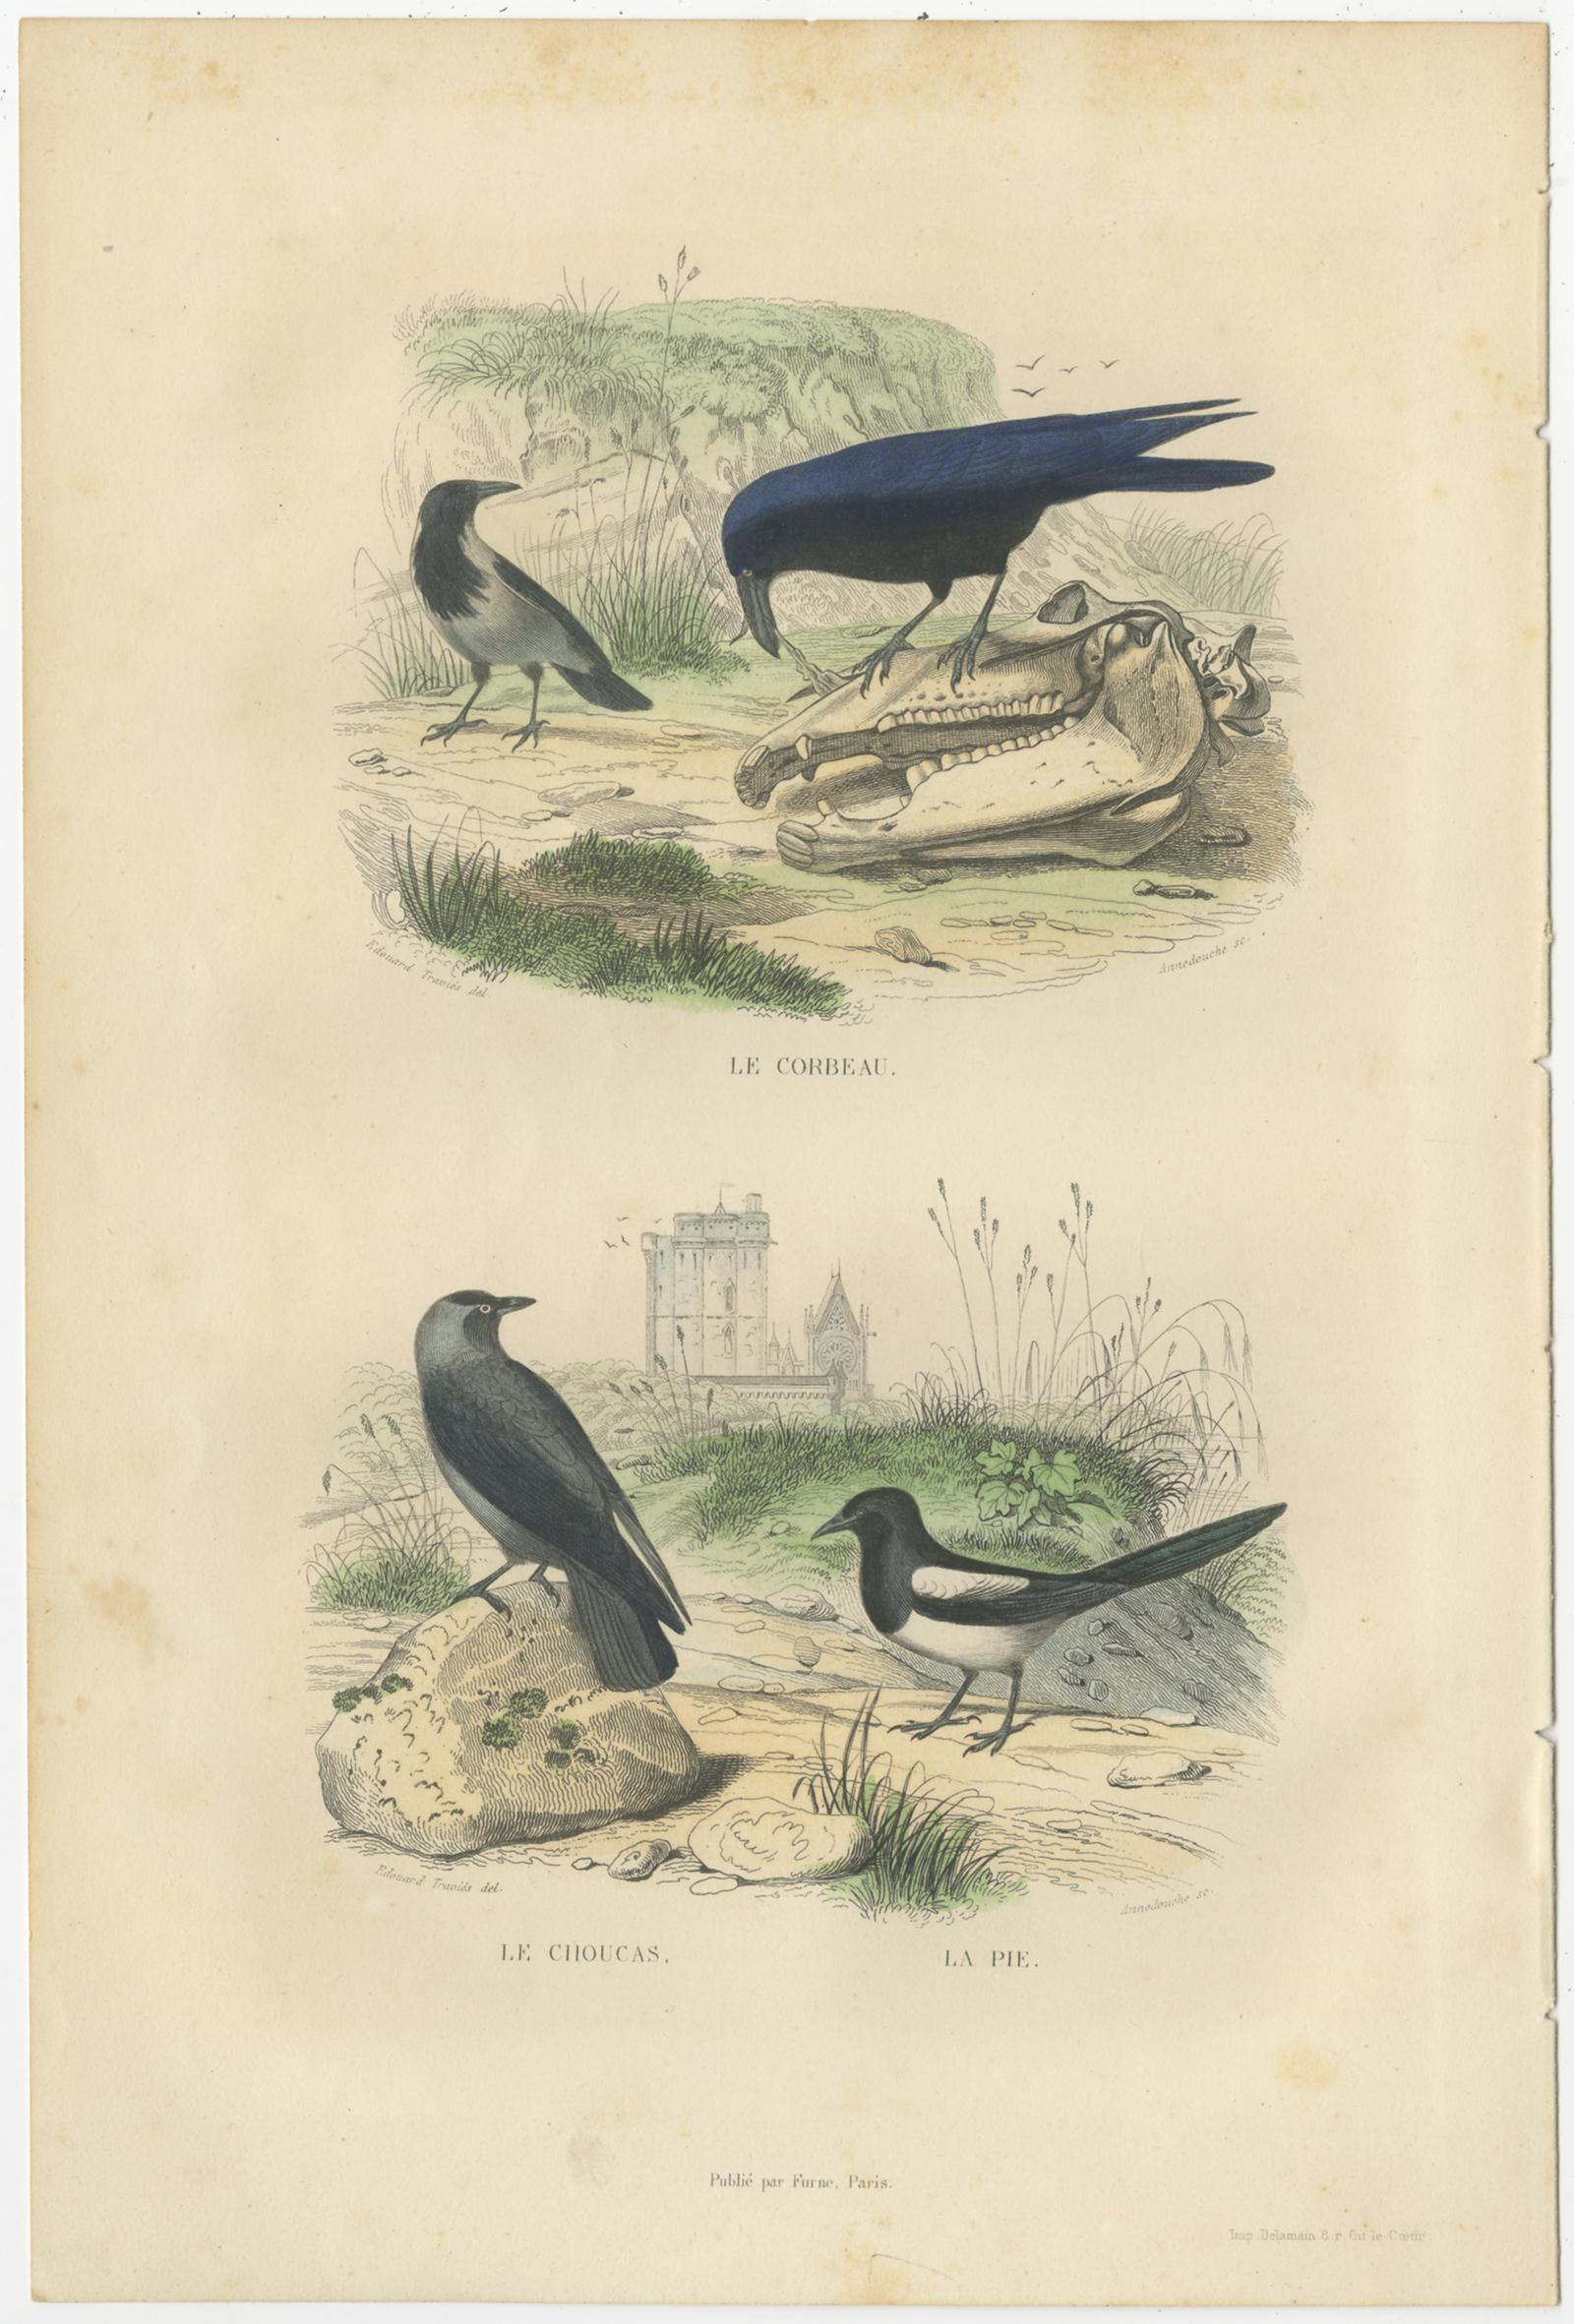 Set of two antique bird prints titled 'Le Corbeau - Le Choucas, Le Rossignol - La petite Charbonniere'. It shows the Rave, Western Jackdaw, the Nightingale and other birds. These prints originate from 'Oeuvres completes de Buffon' published circa